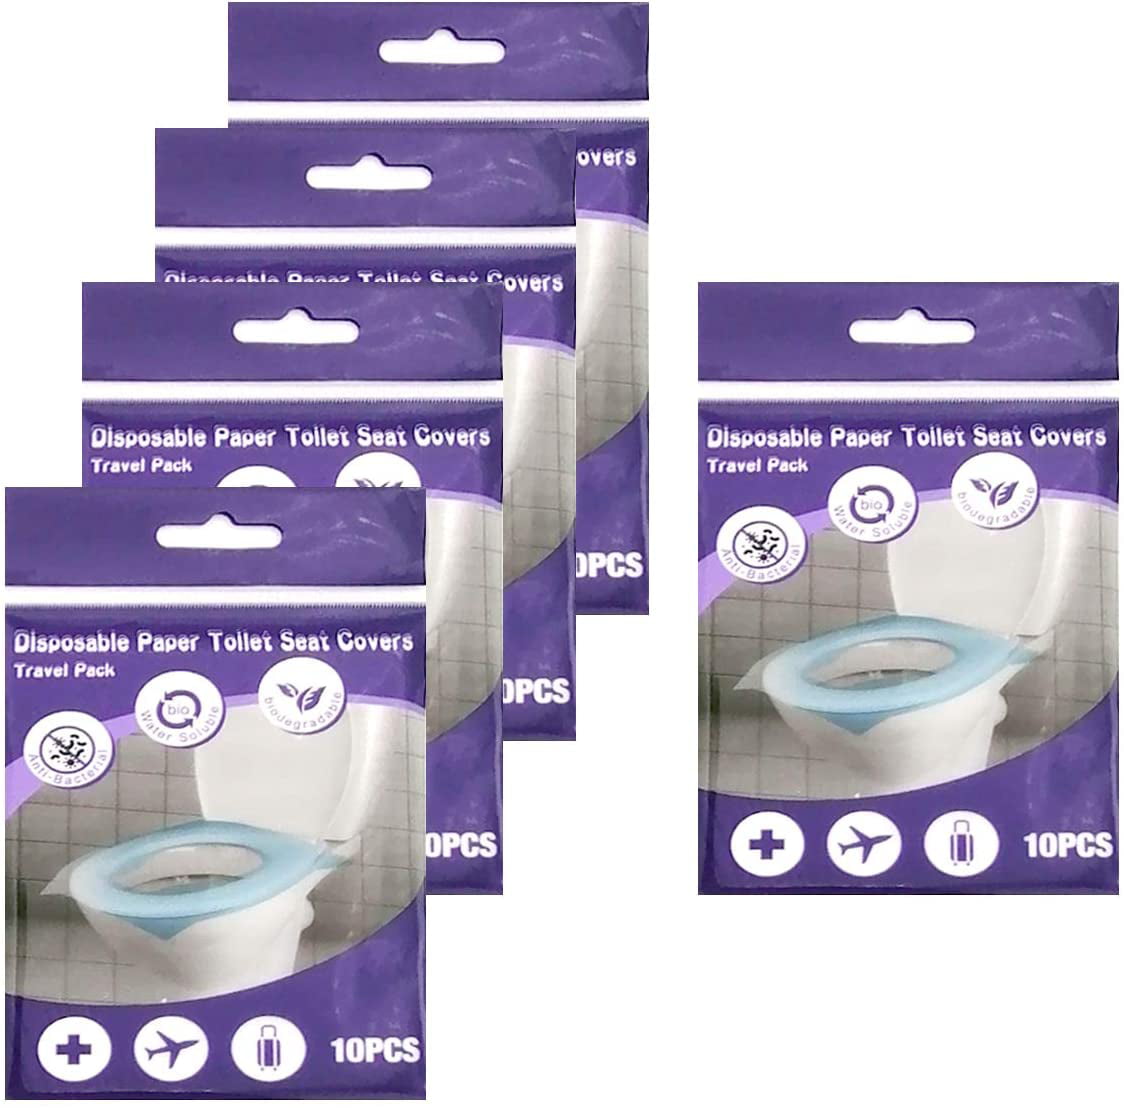 100-Count Disposable Toilet Seat Covers Flushable Paper Travel Pack Rockland Guard 